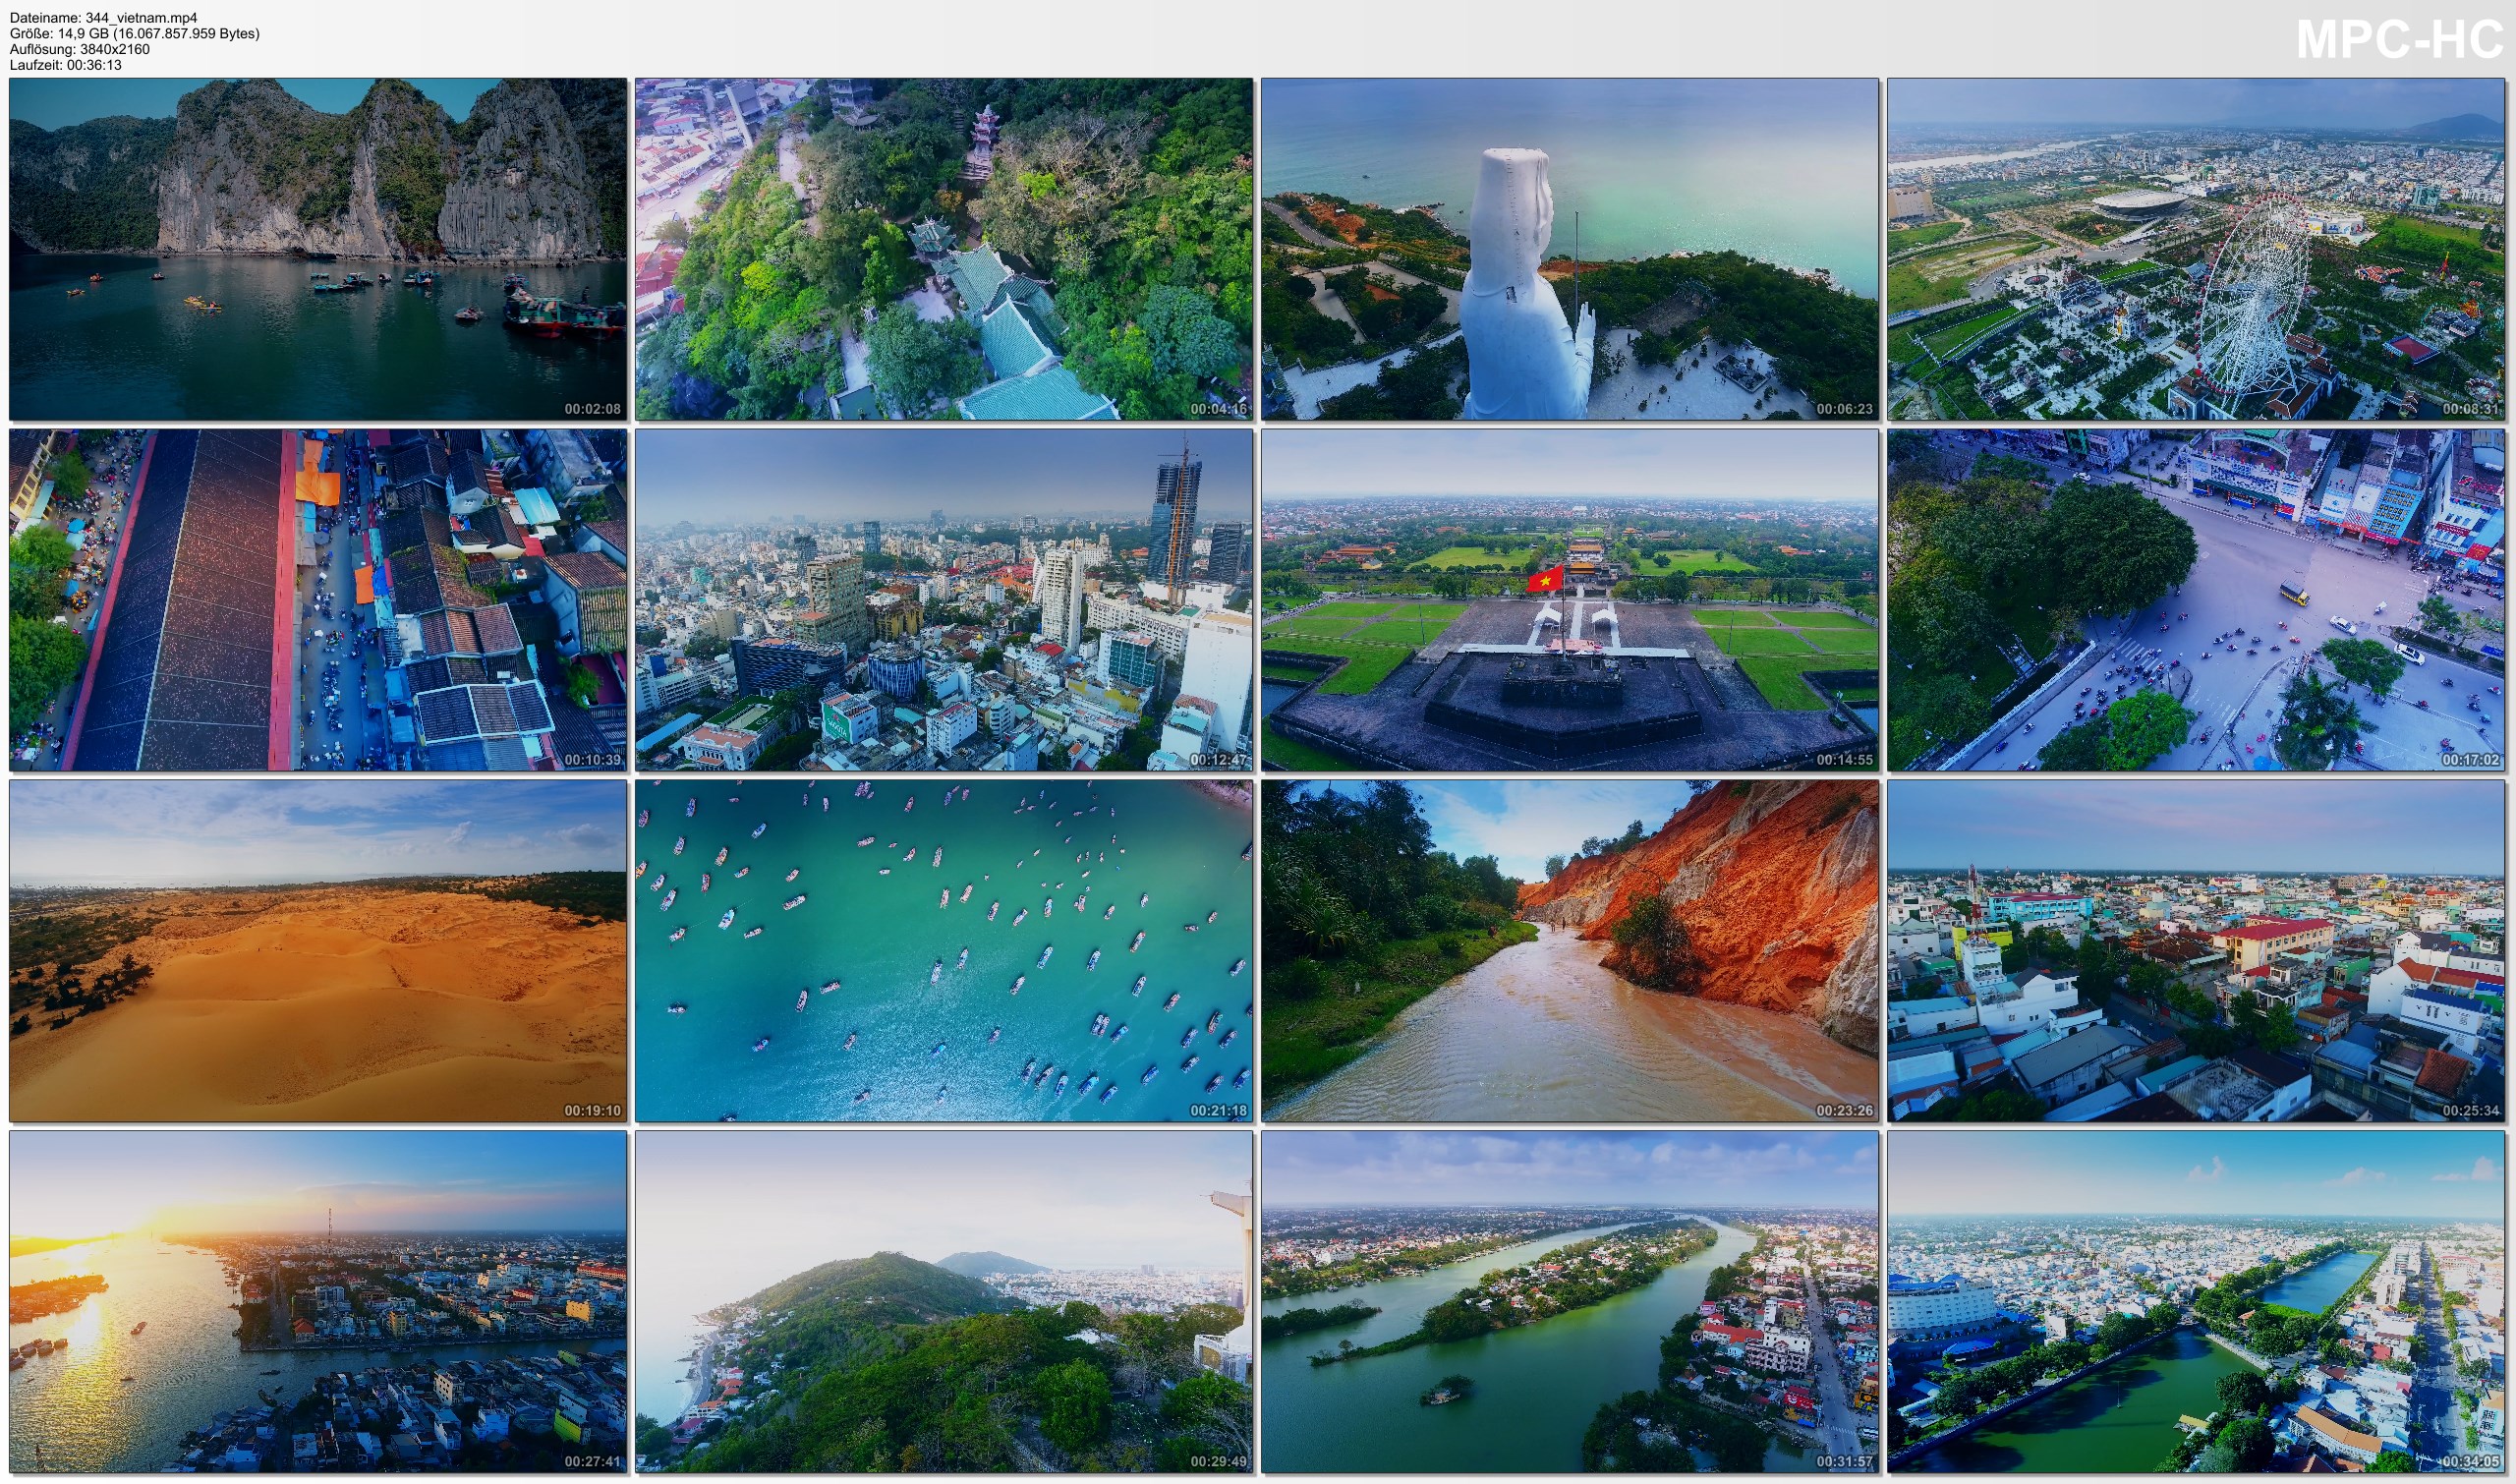 Drone Pictures from Video 【4K】Drone Footage | The Beauty of Vietnam in 37 Minutes 2019 | Cinematic Aerial Saigon DaNang Hoi An